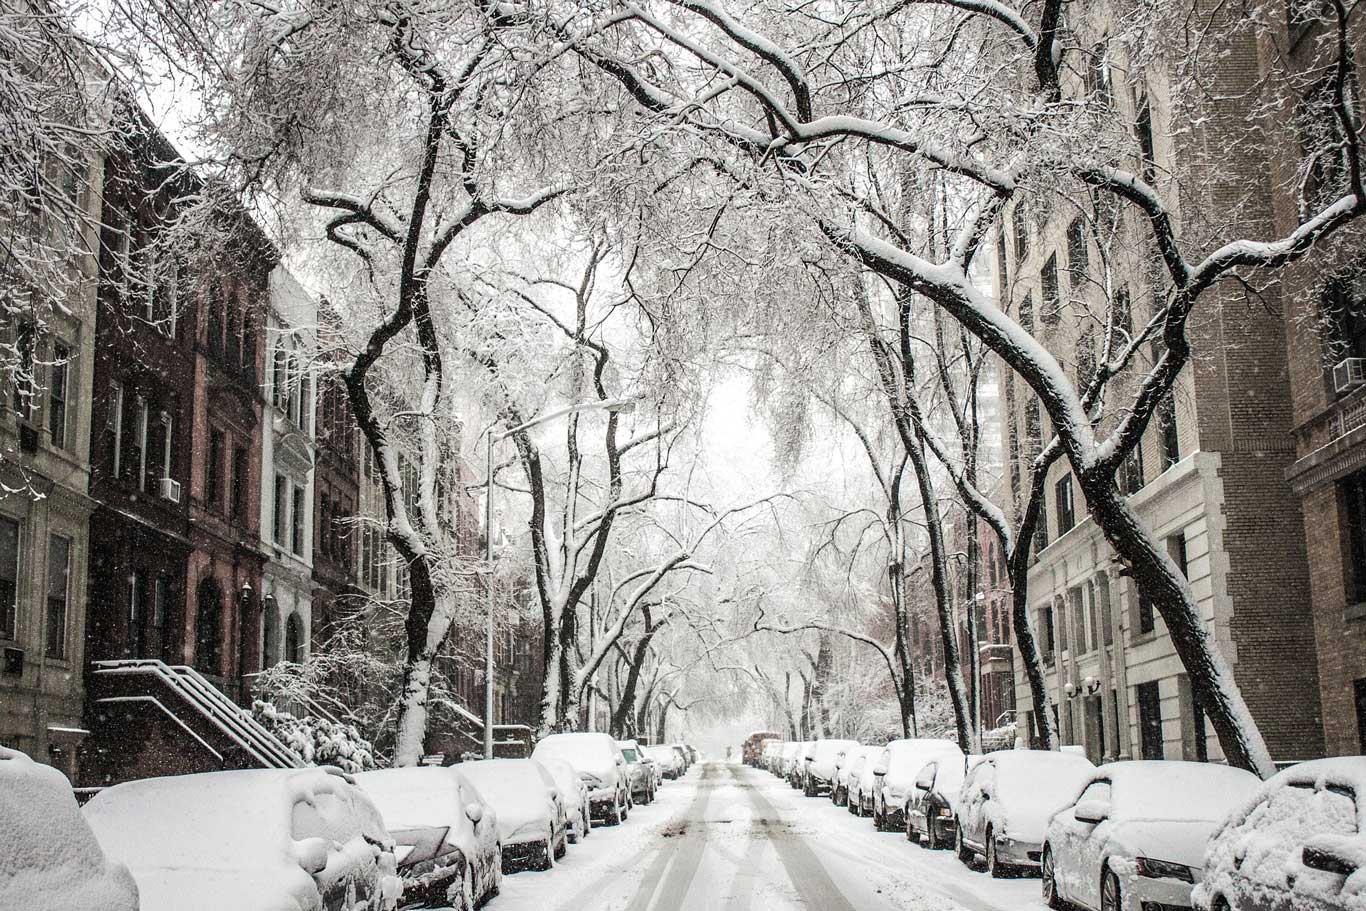 A snowy urban street with cars parked on both sides